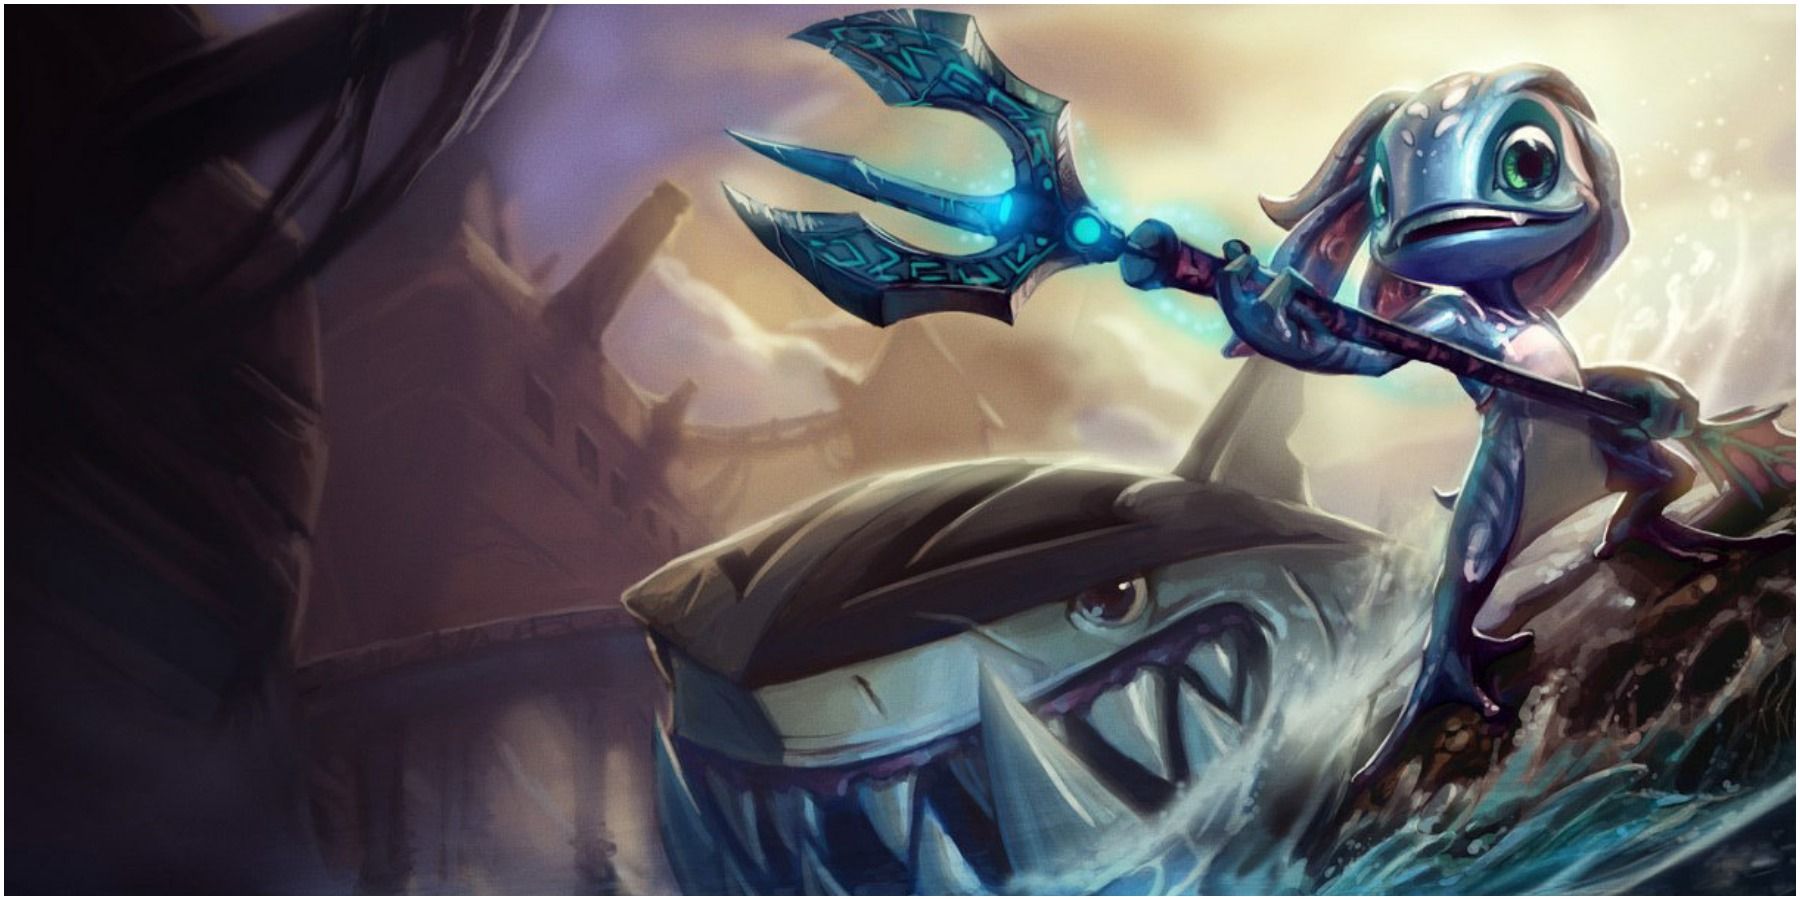 Fizz With His Signature Trident & Shark